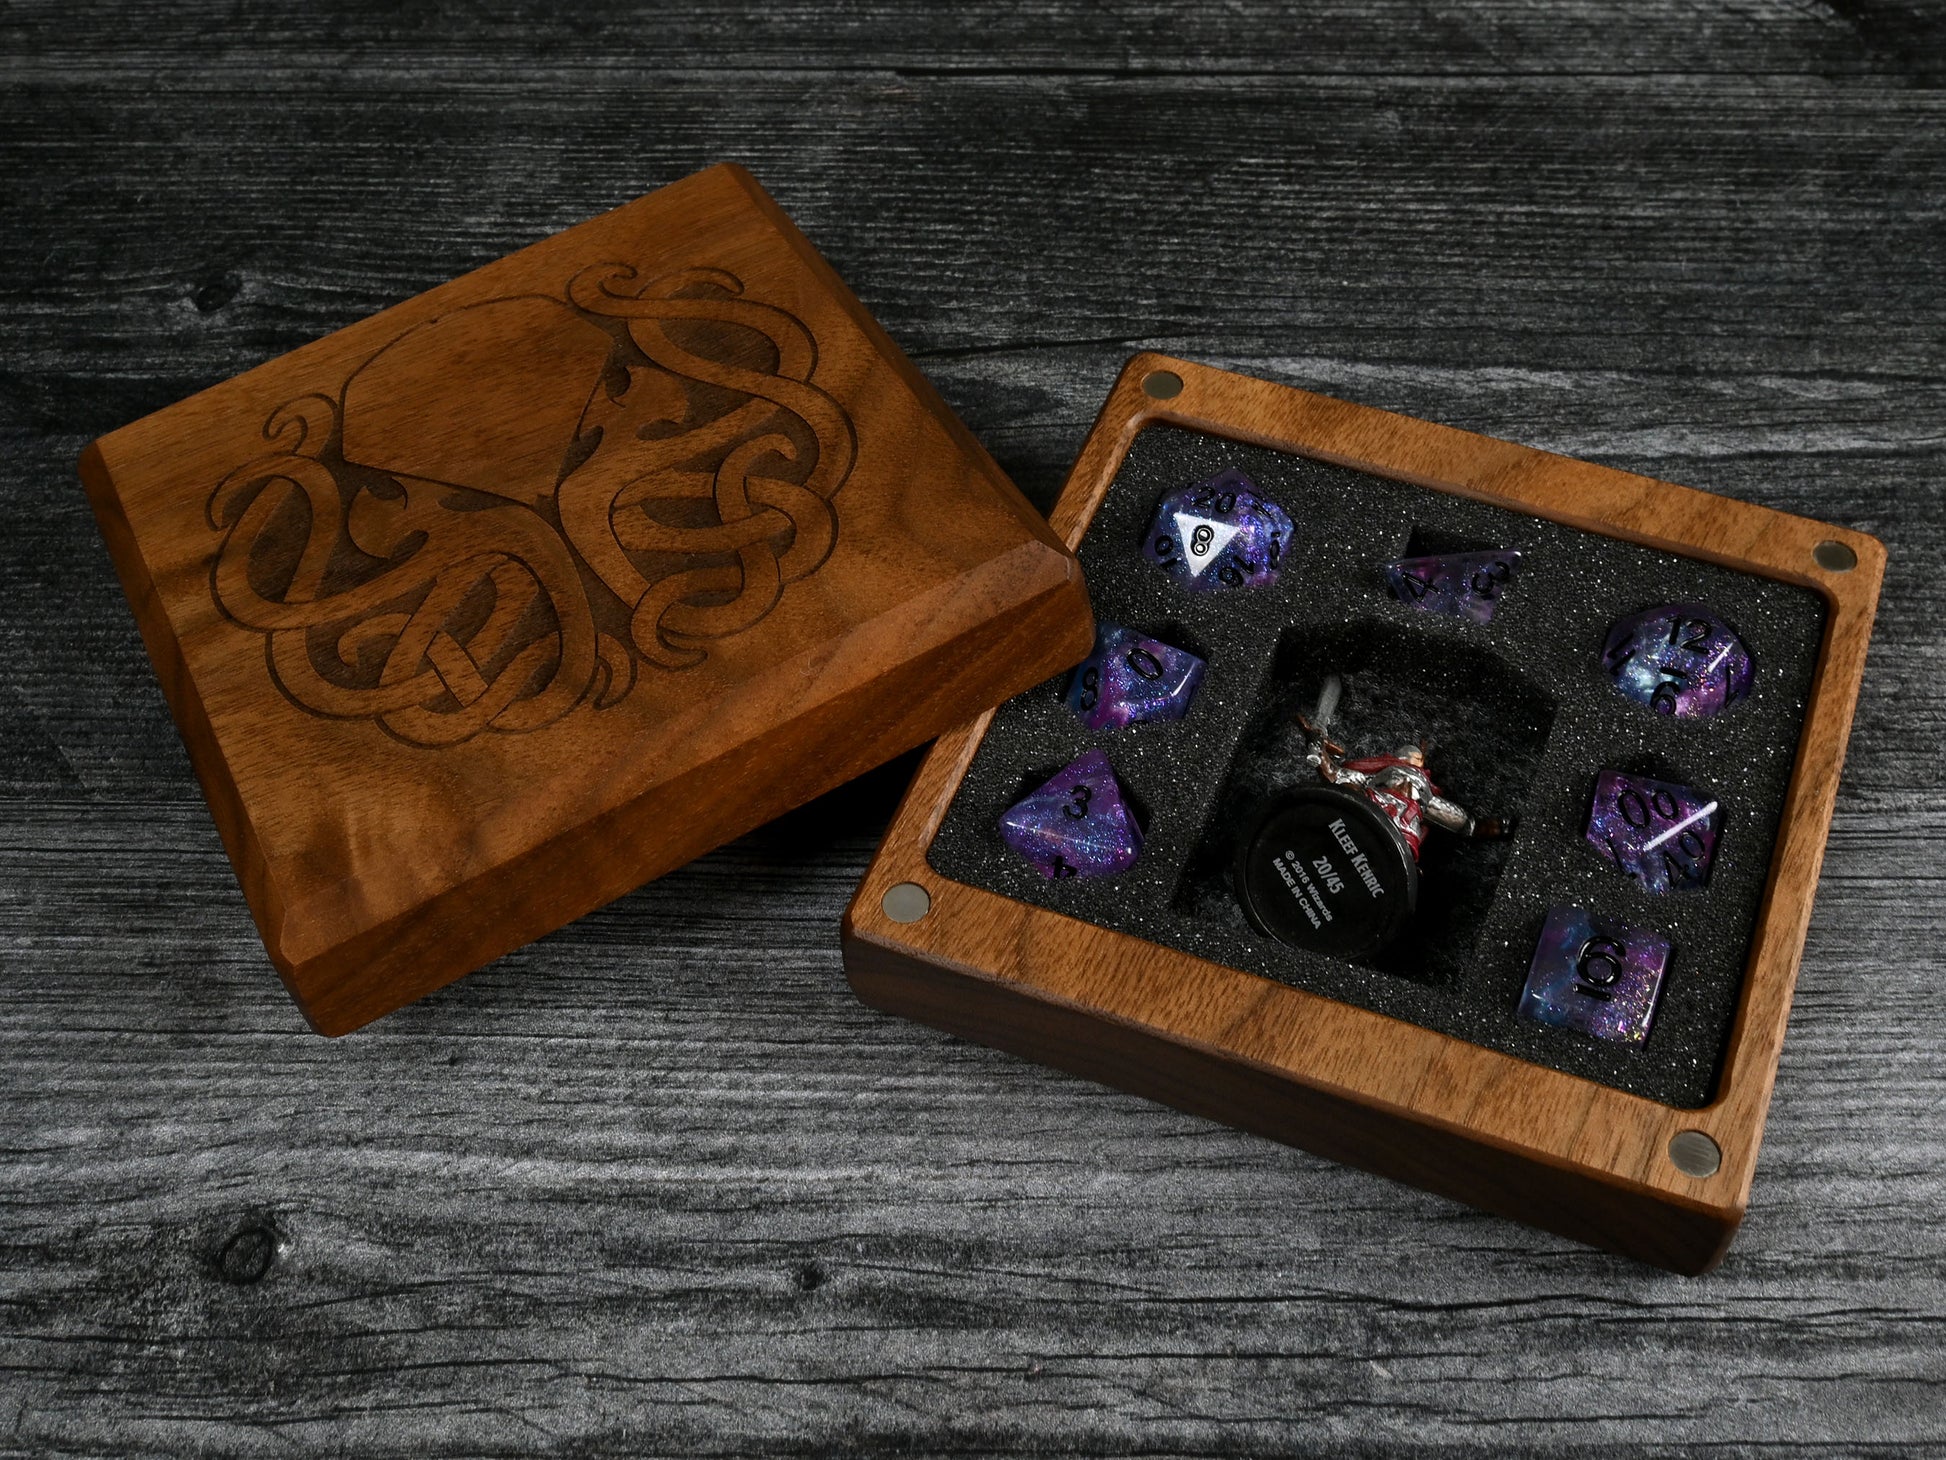 Walnut little delver dice box for dnd rpg dungeons & dragons